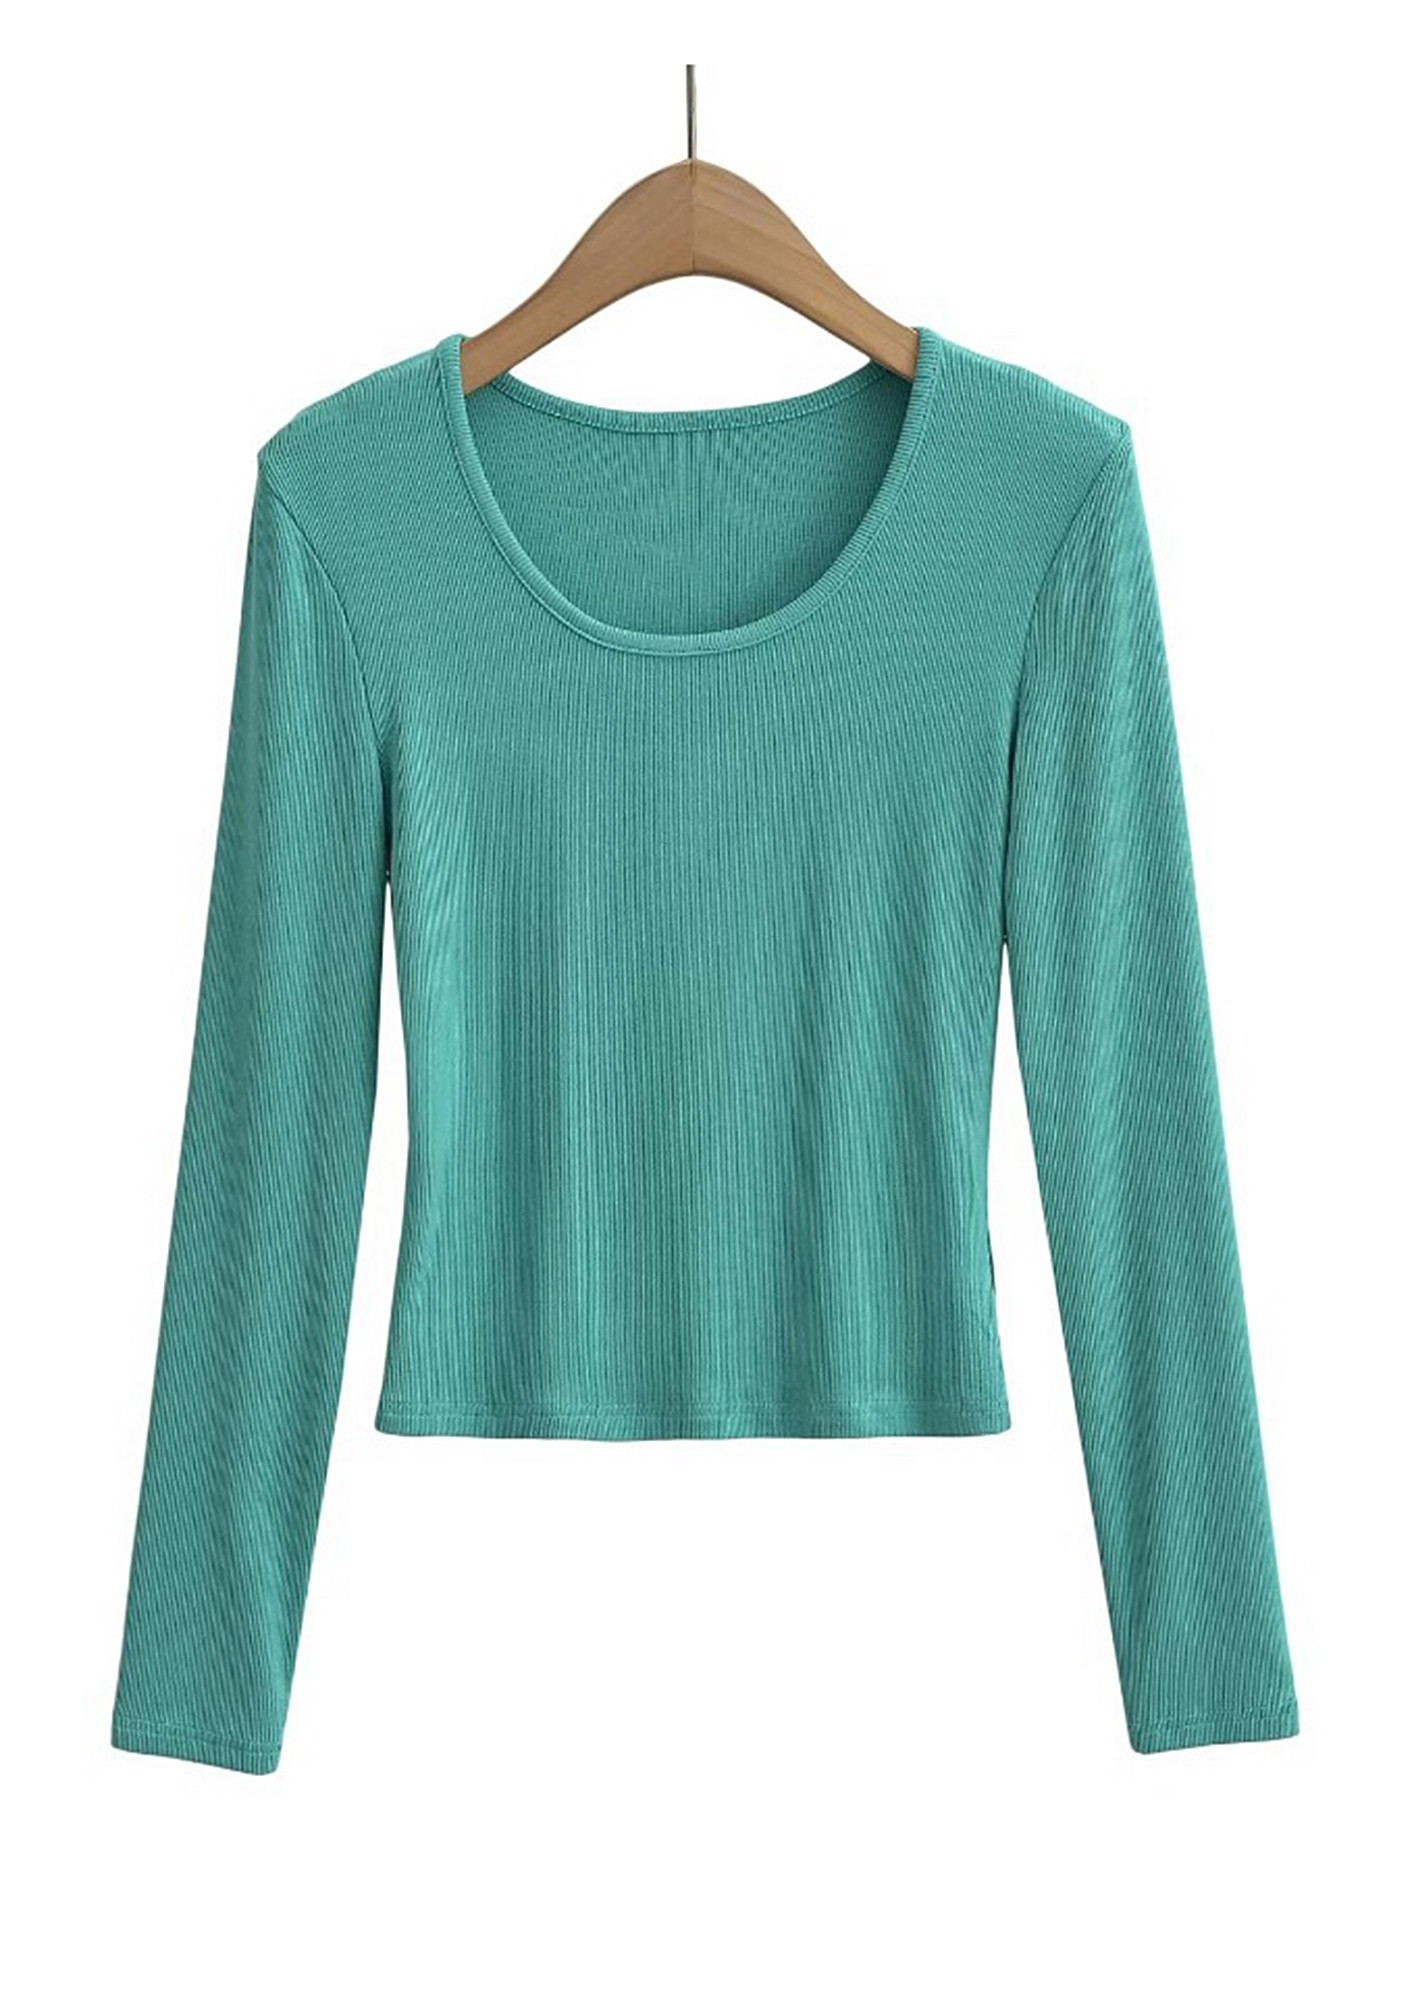 Buy ROUND NECK BLUE GREEN RIB-KNIT SLIM T-SHIRT for Women Online in India